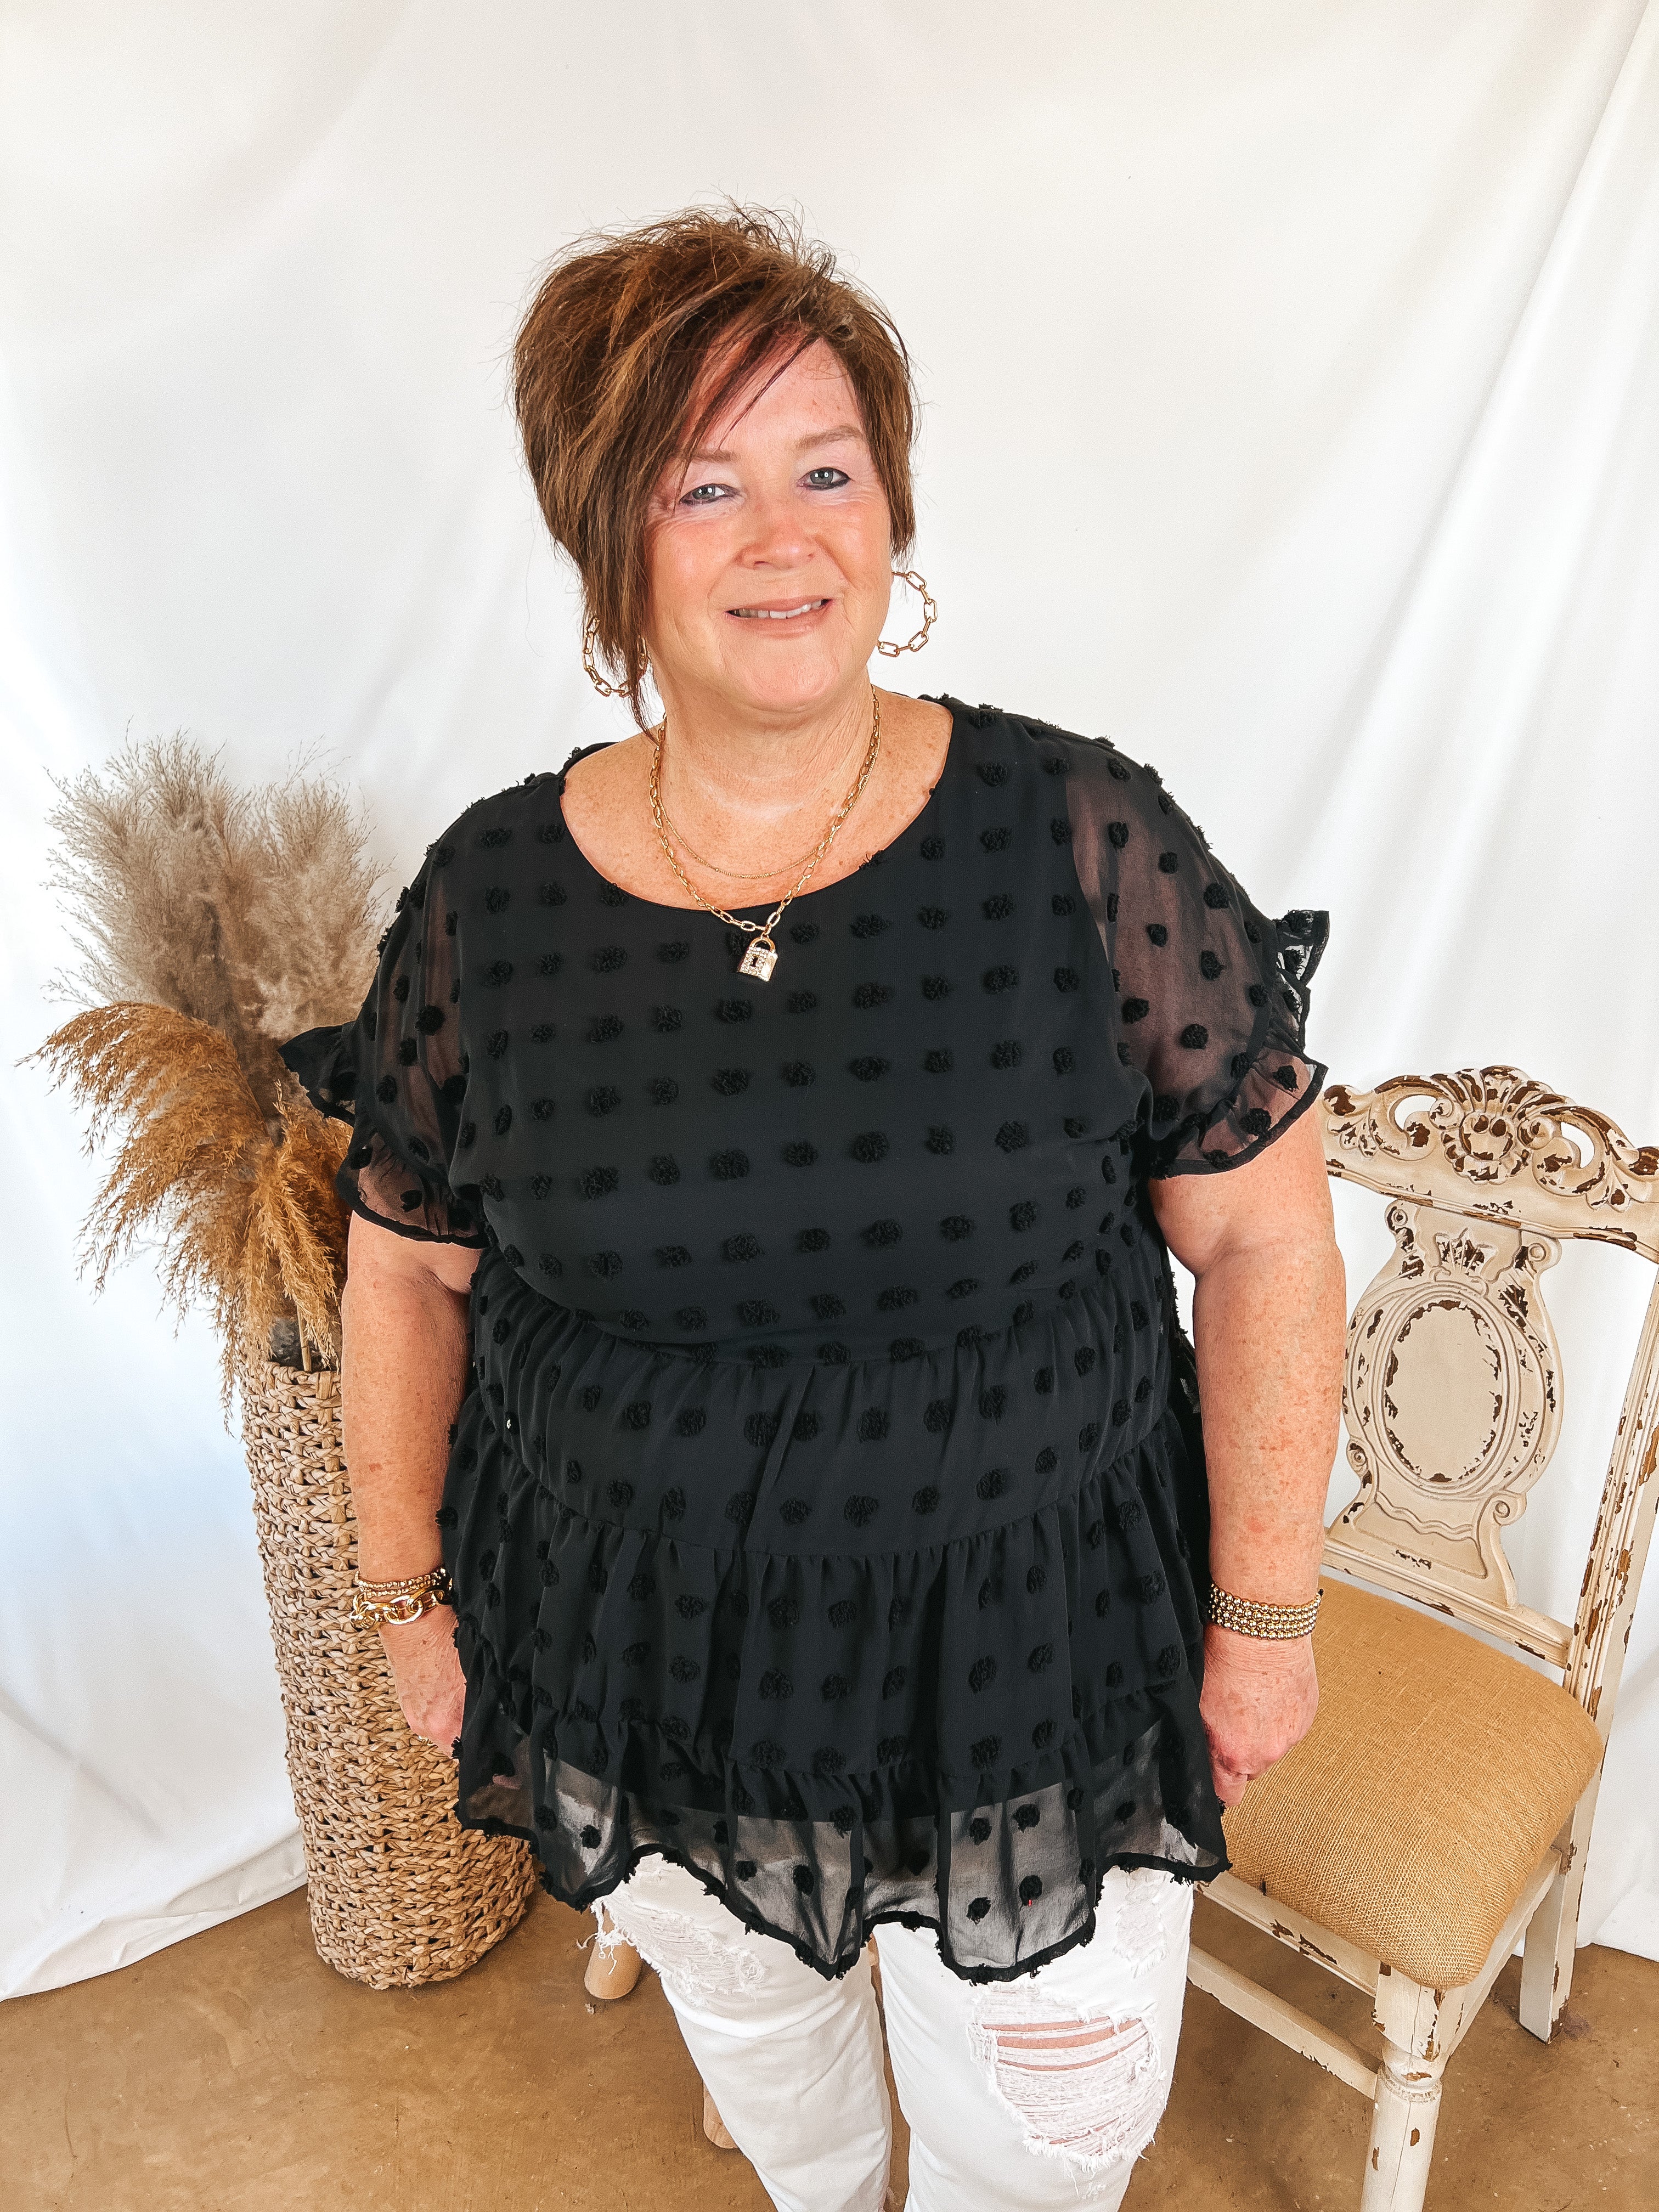 Such A Delight Tiered Swiss Dot Top with Ruffle Cap Sleeves in Black - Giddy Up Glamour Boutique